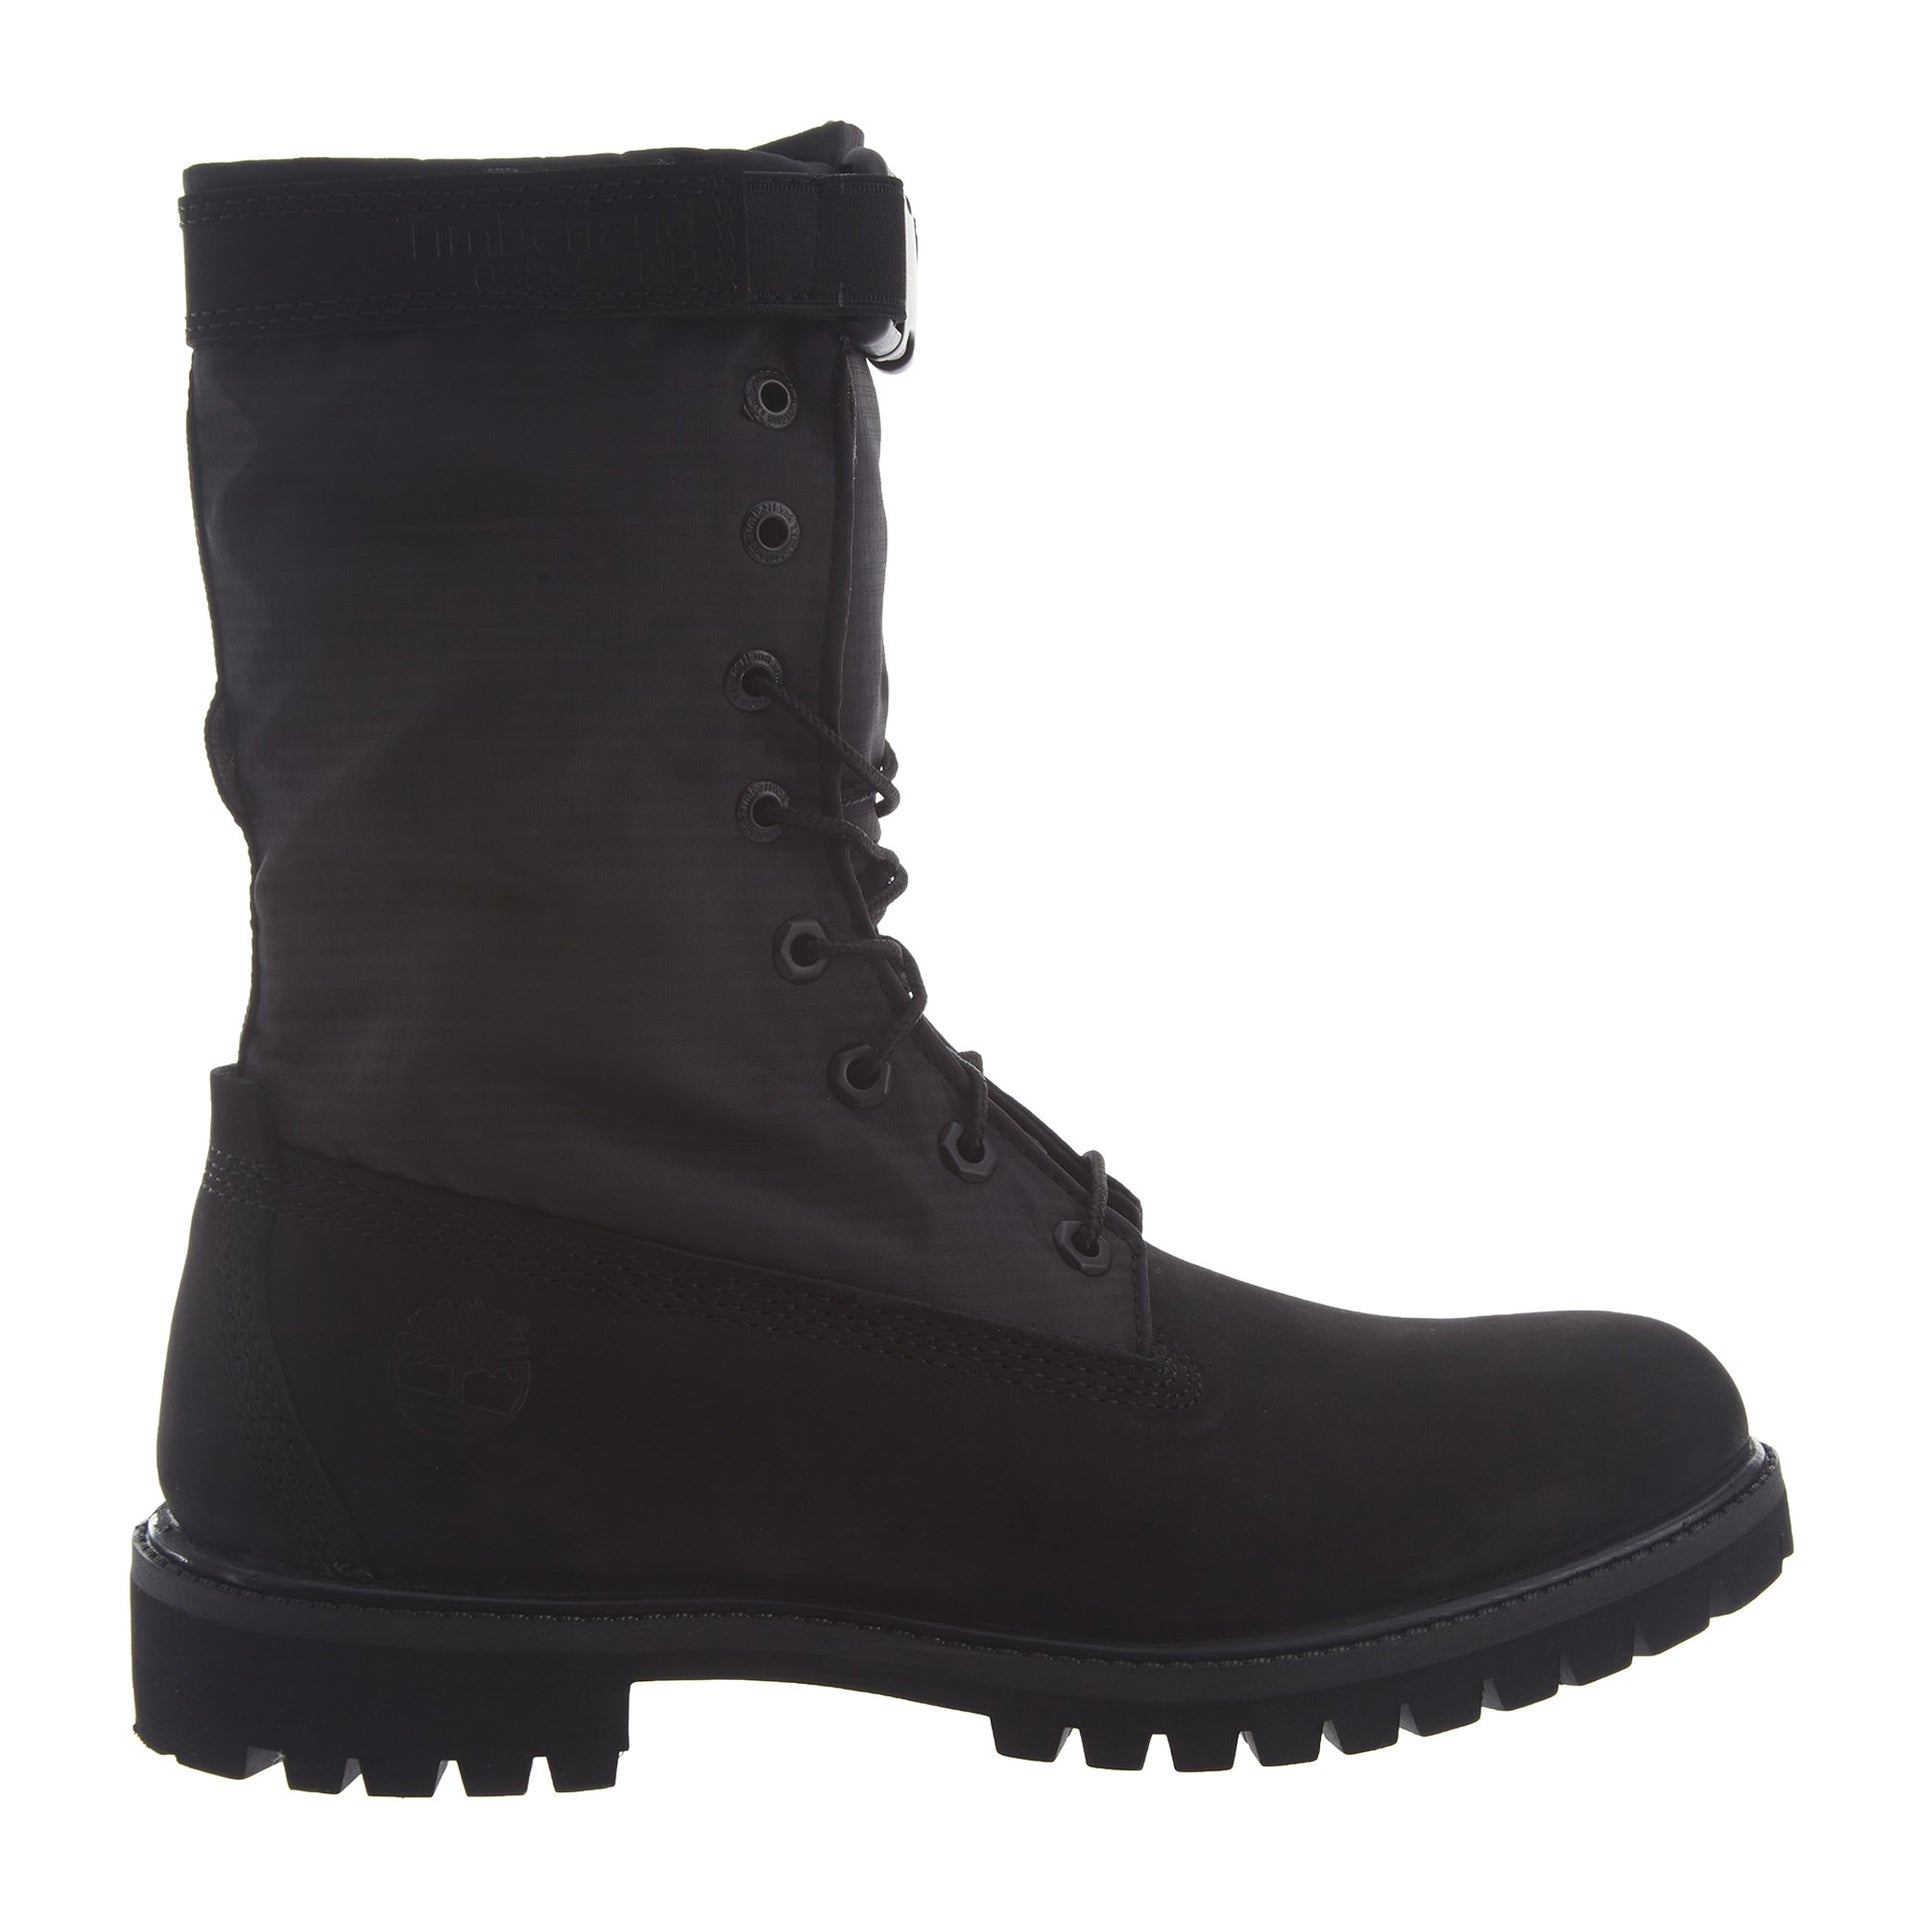 Timberland 6" Premium Gaiter Boot Mens Style : Tb0a1ubp-Blk